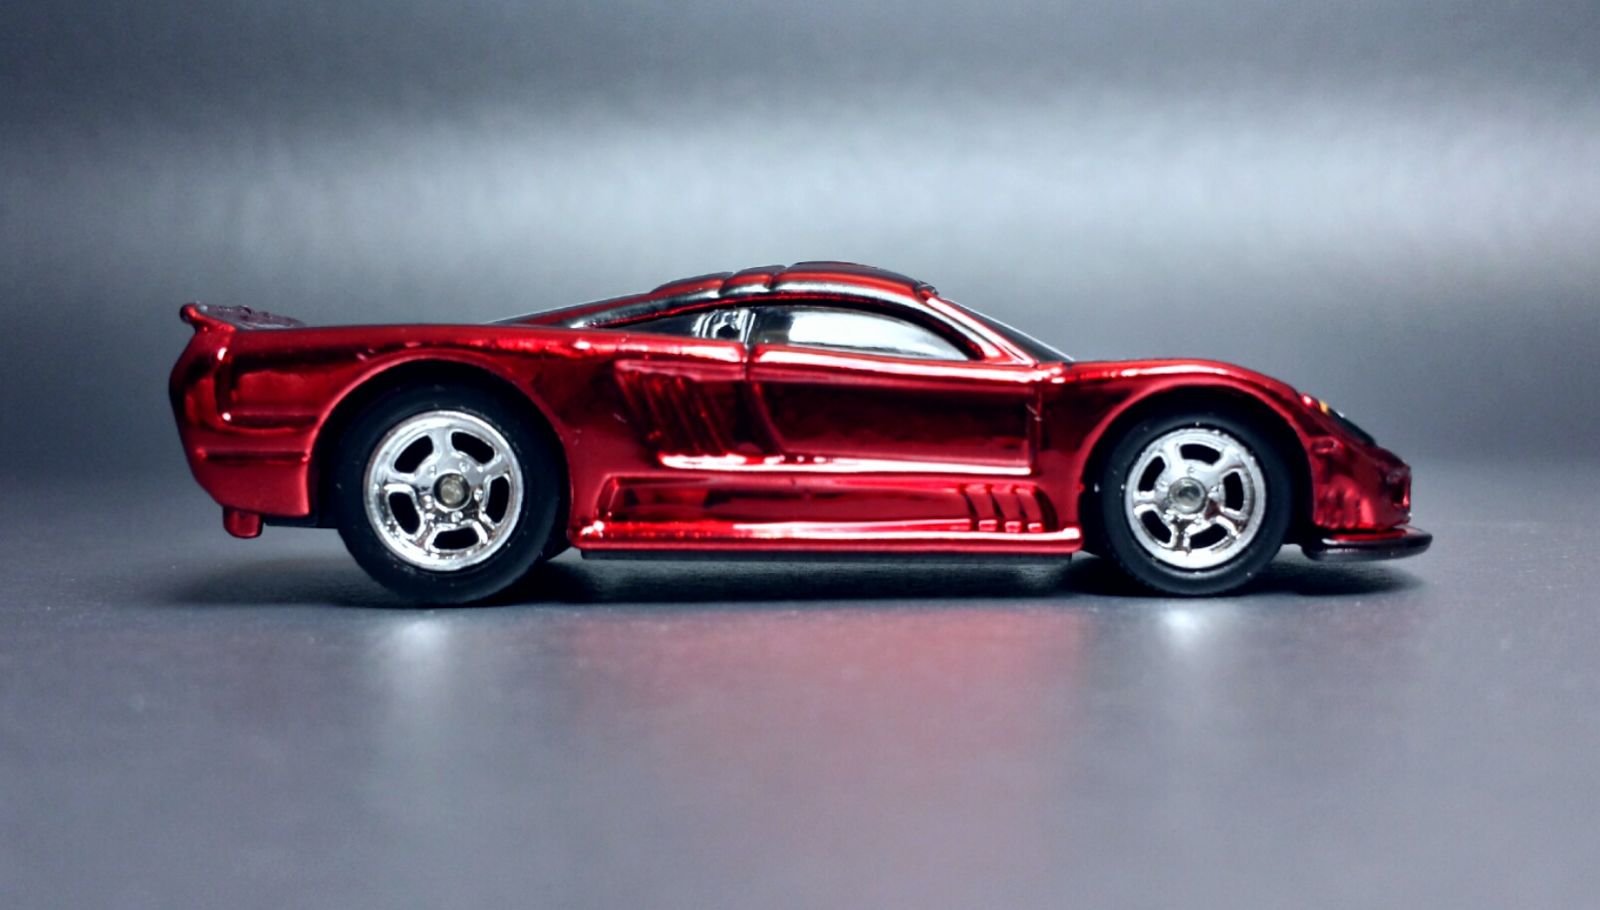 Illustration for article titled Saleen S7 Saturday